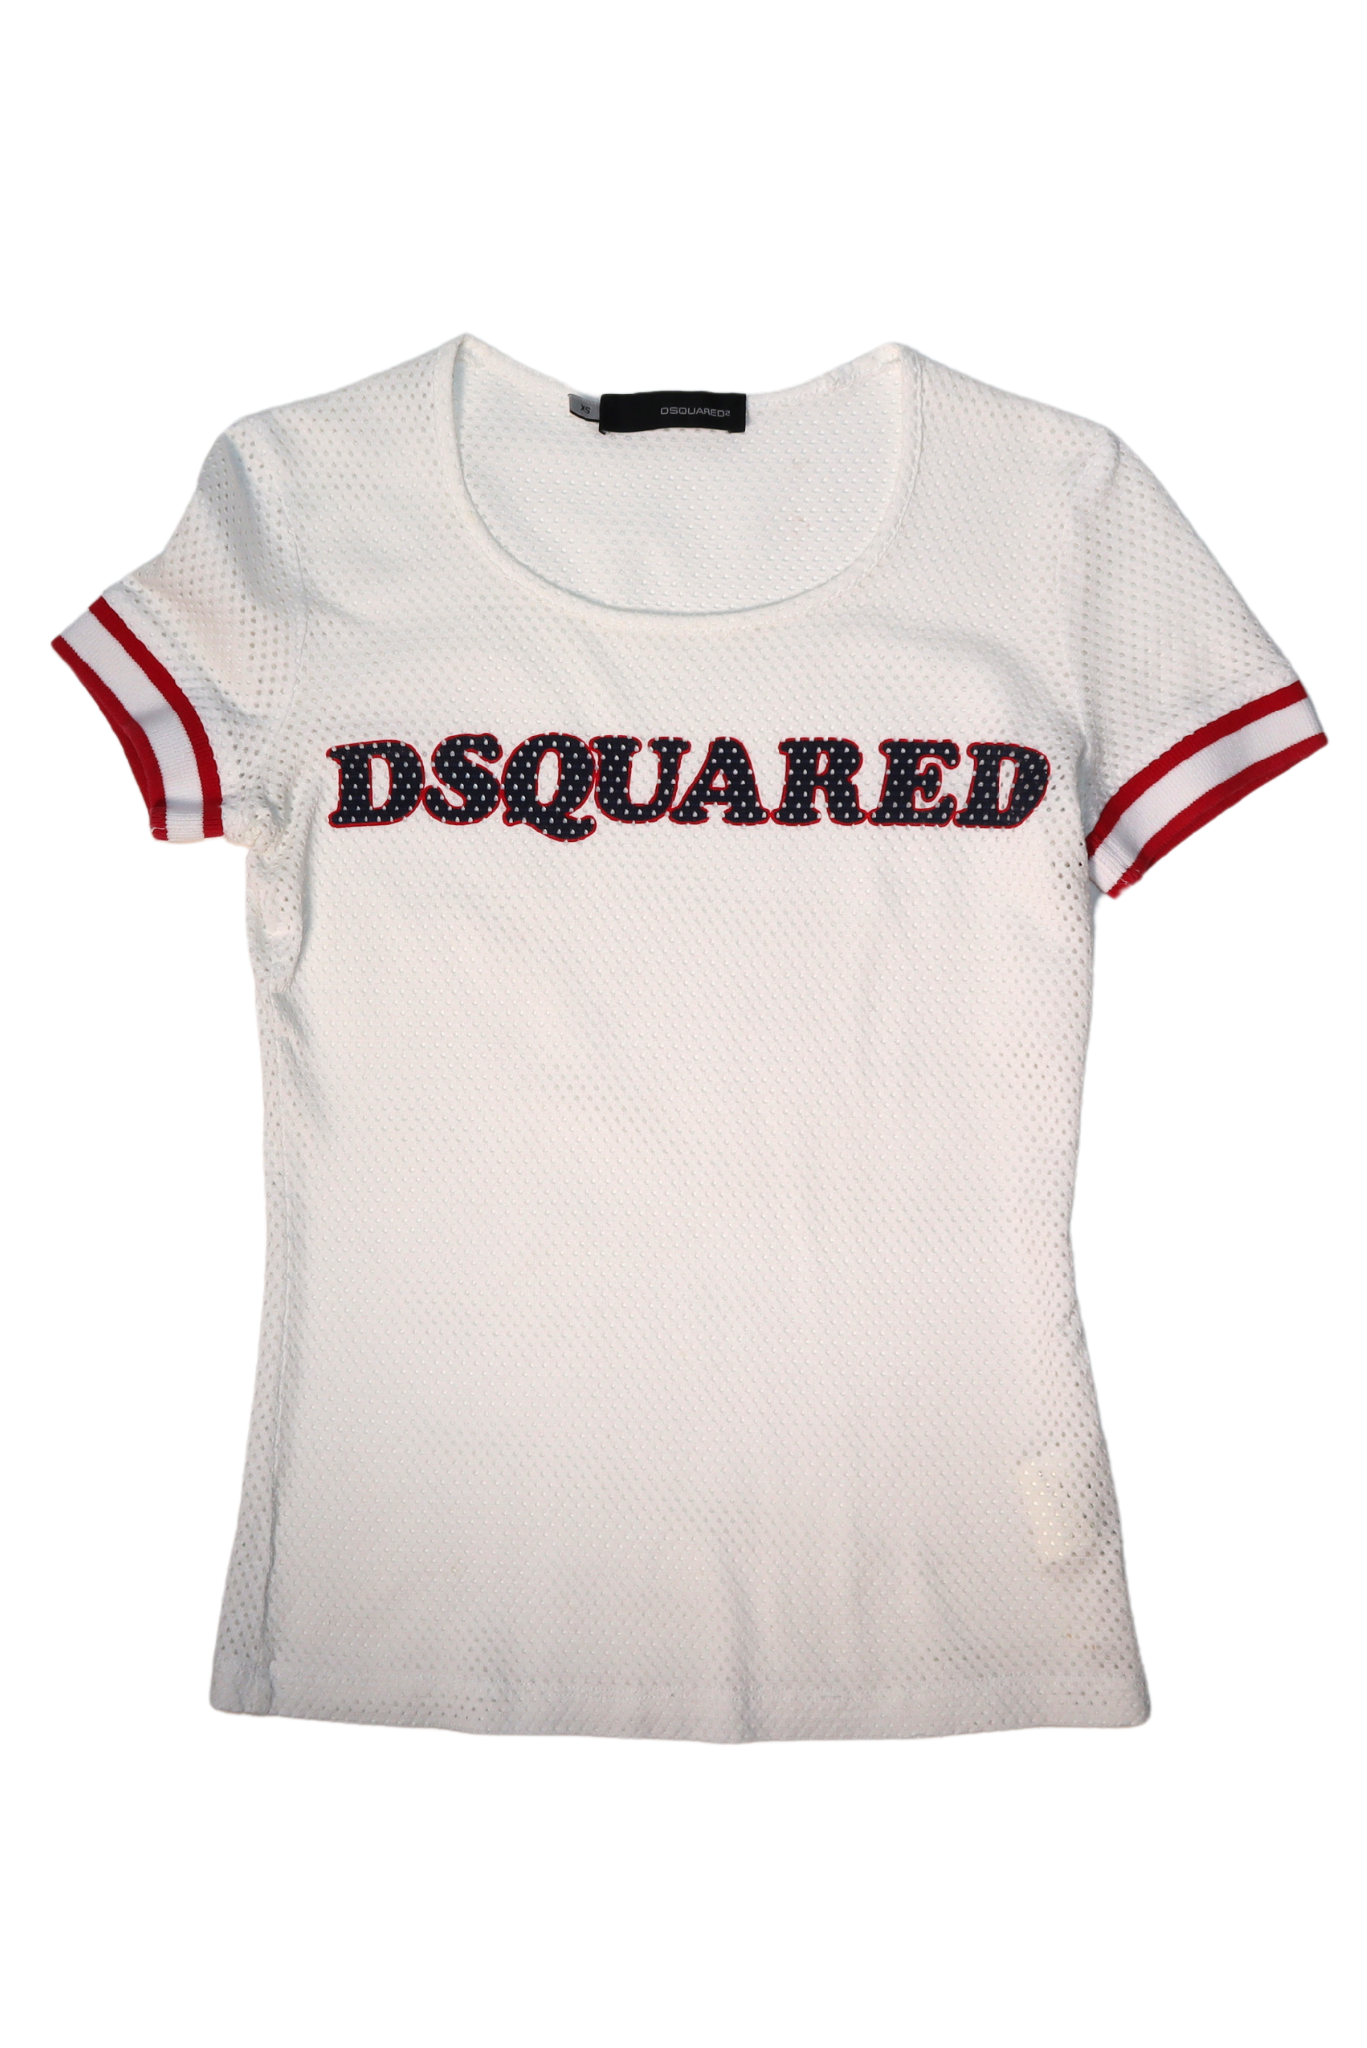 Dsquared2 Logo Baby Tee